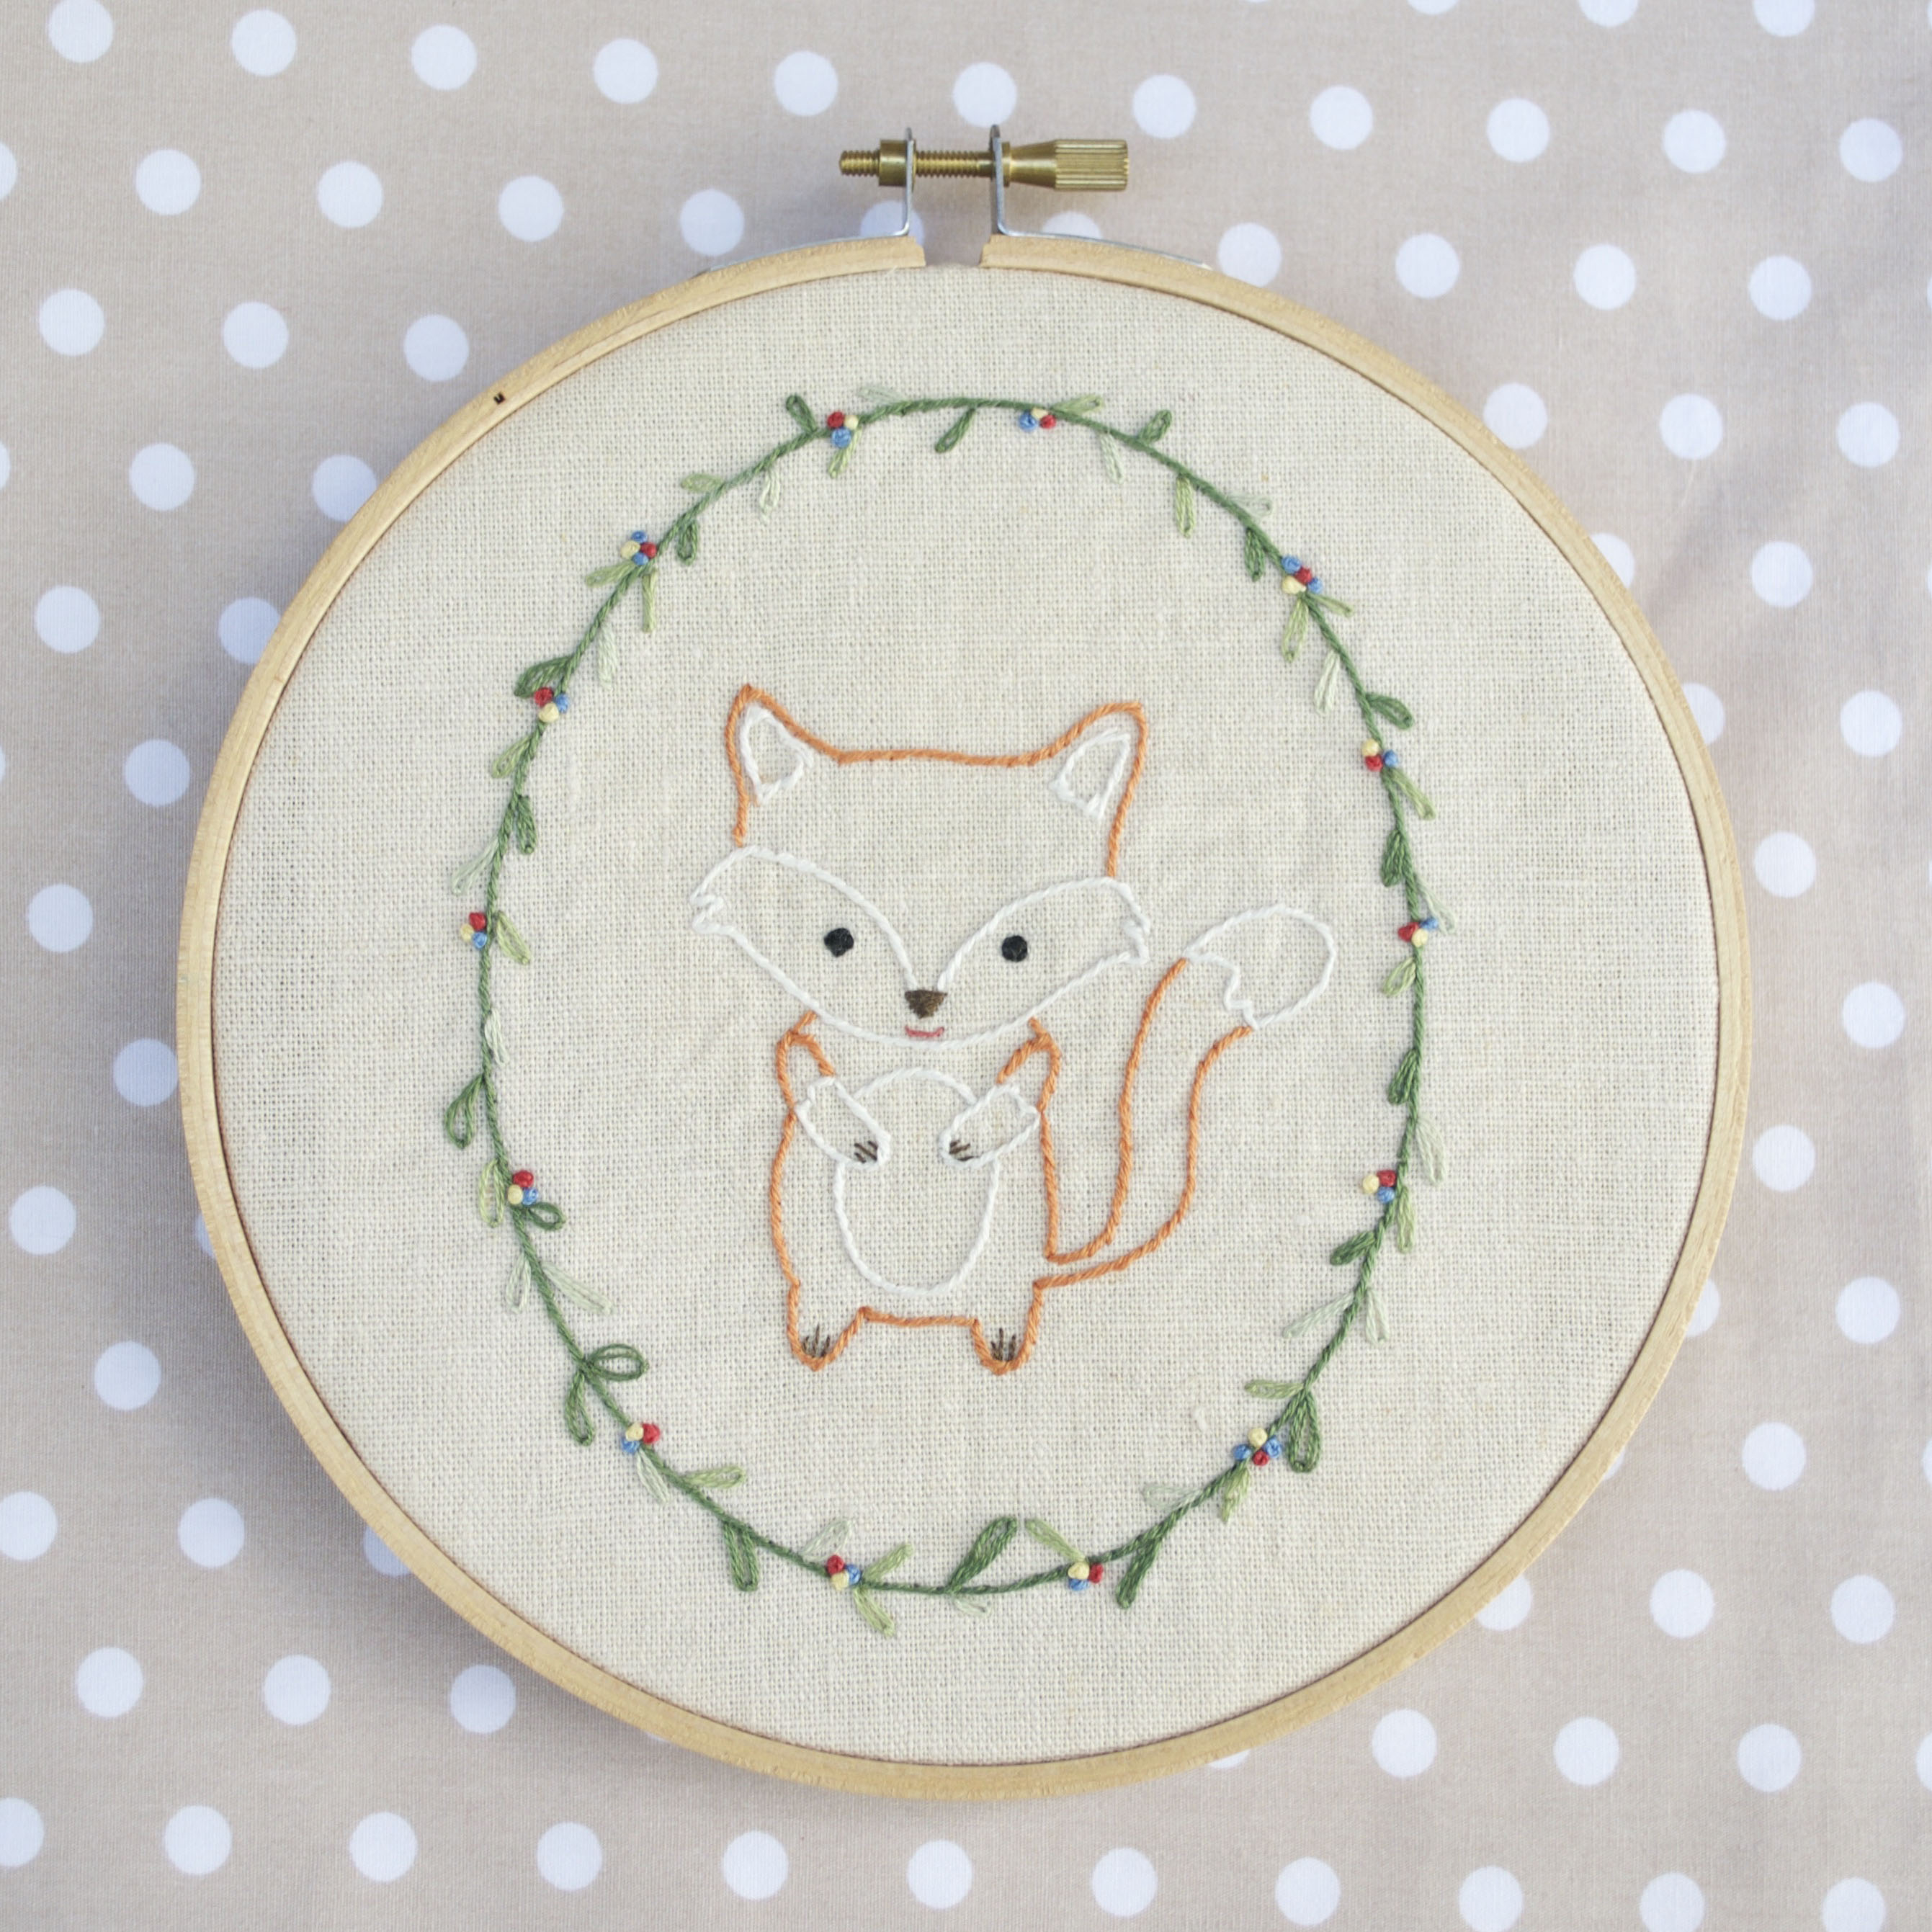 Hand Embroidery Patterns Little Fox Hand Embroidery Pdf Pattern Instructions